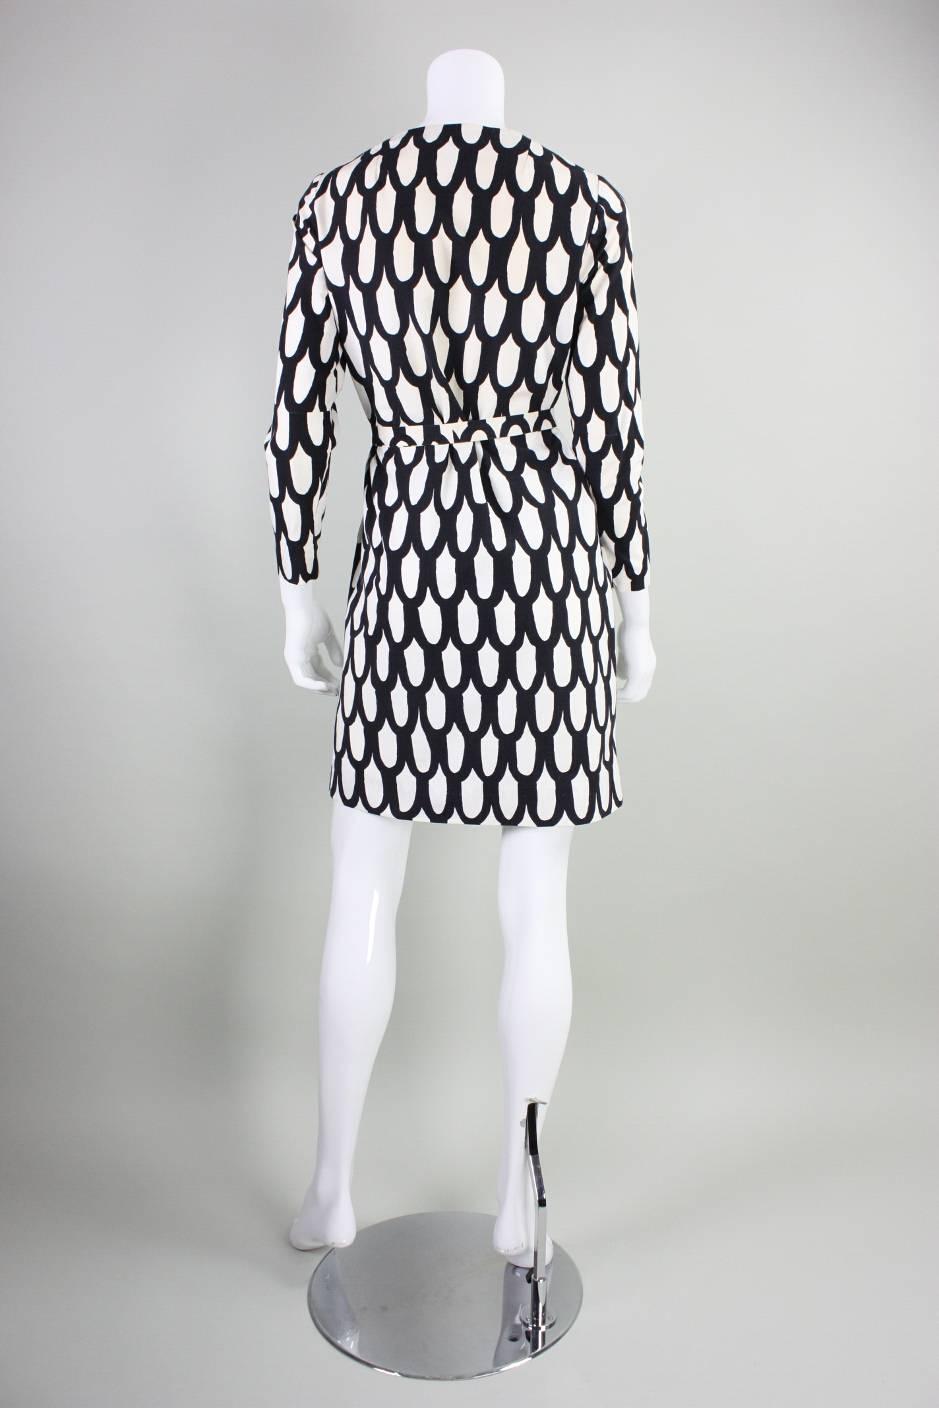 1965 Marimekko Black & White Printed Dress In Excellent Condition For Sale In Los Angeles, CA